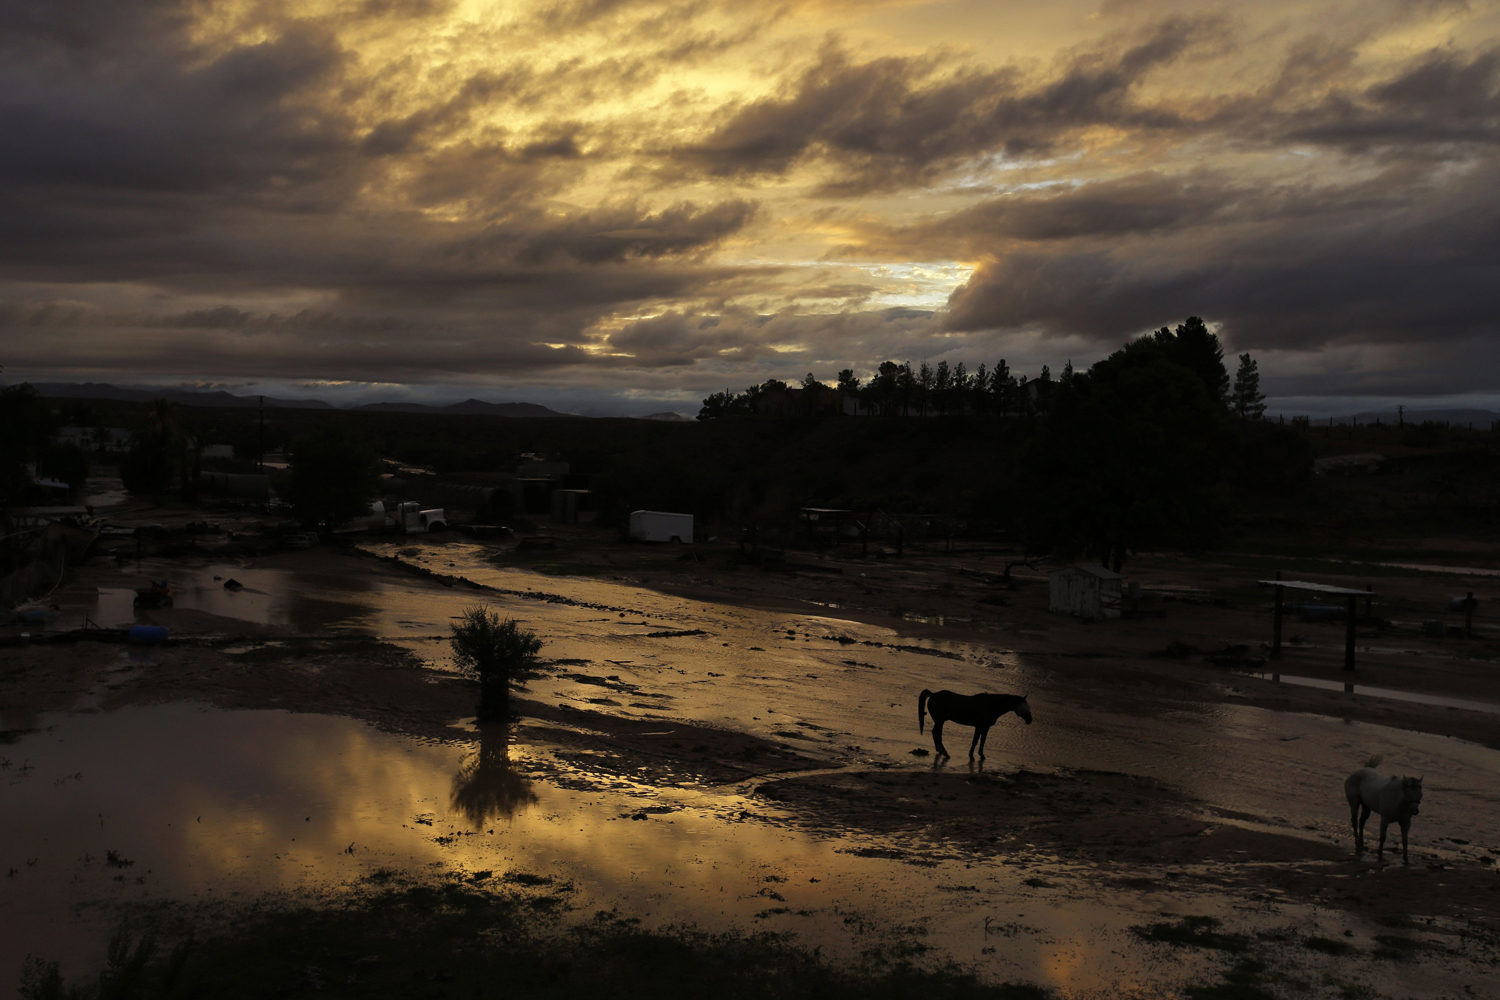 Sept. 8, 2014. Horses walk through flood water behind a home in Moapa, Nev. Flooding throughout the area damaged homes and roads.